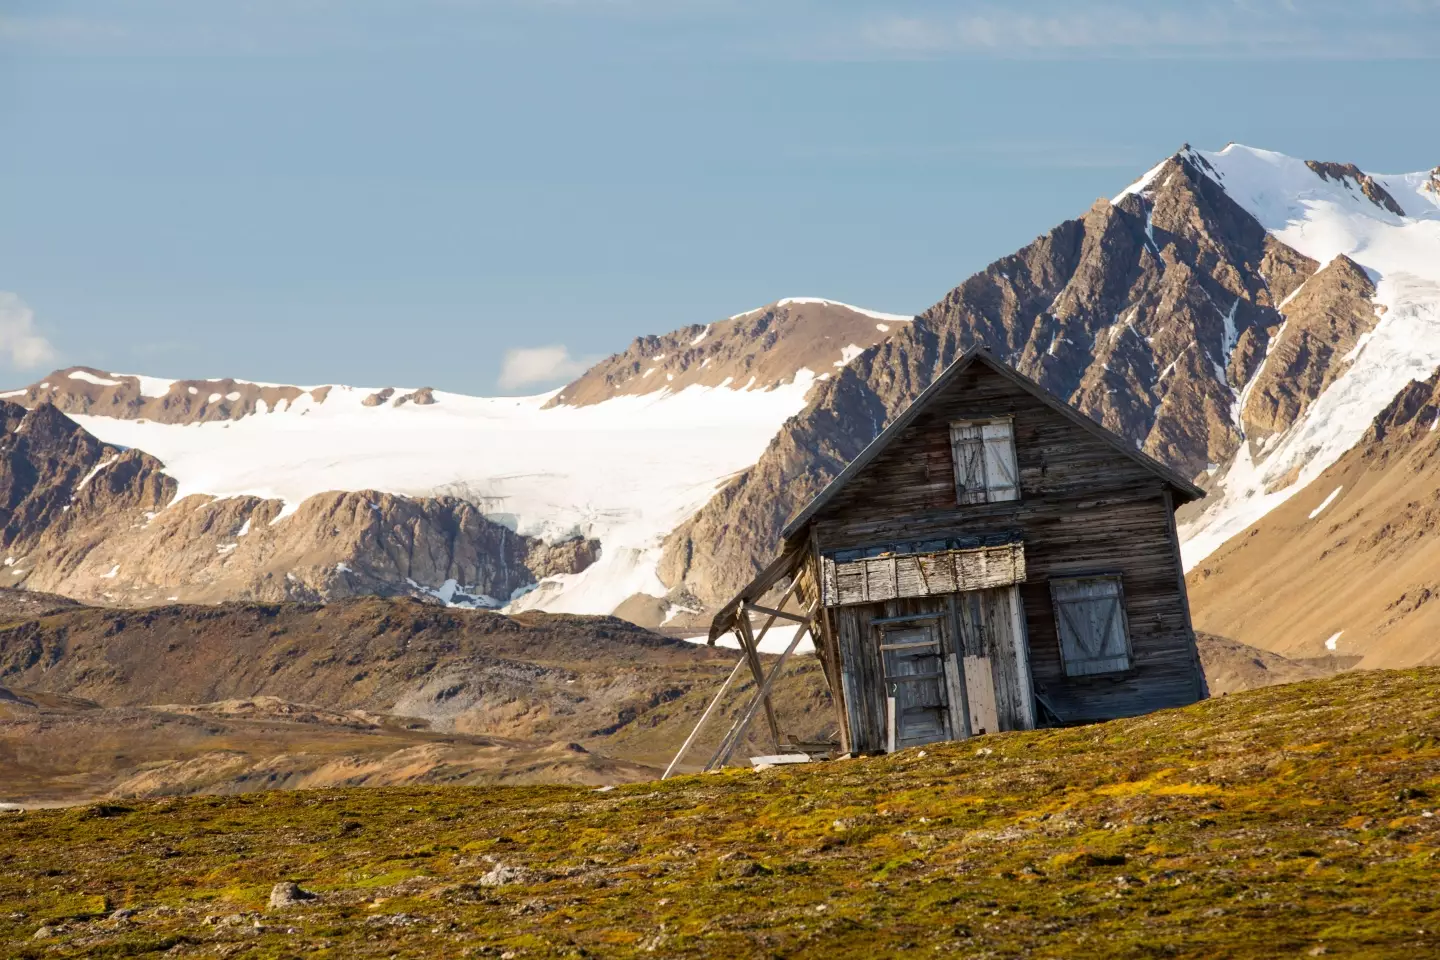 This old house in Norway is gradually sliding down slope due to solifluction and permafrost melt.